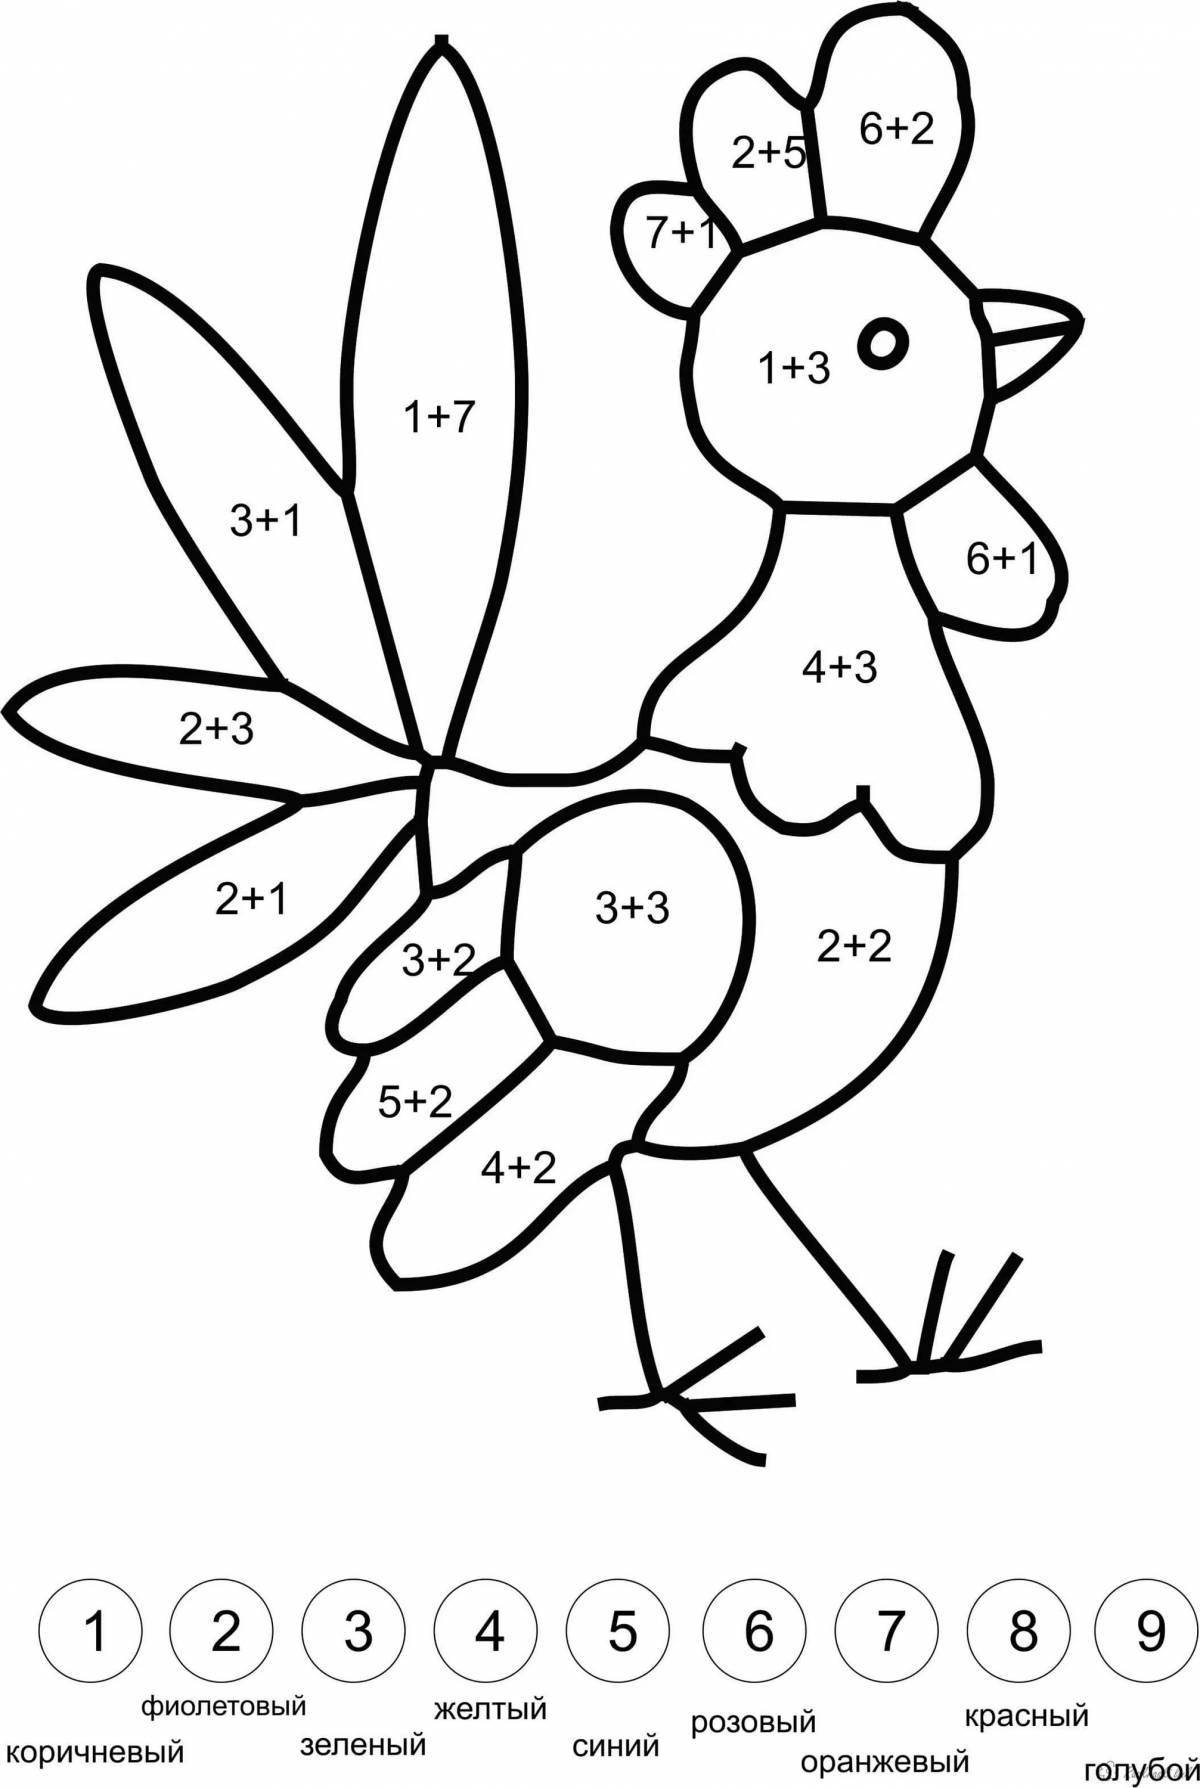 Creative math coloring book for kids